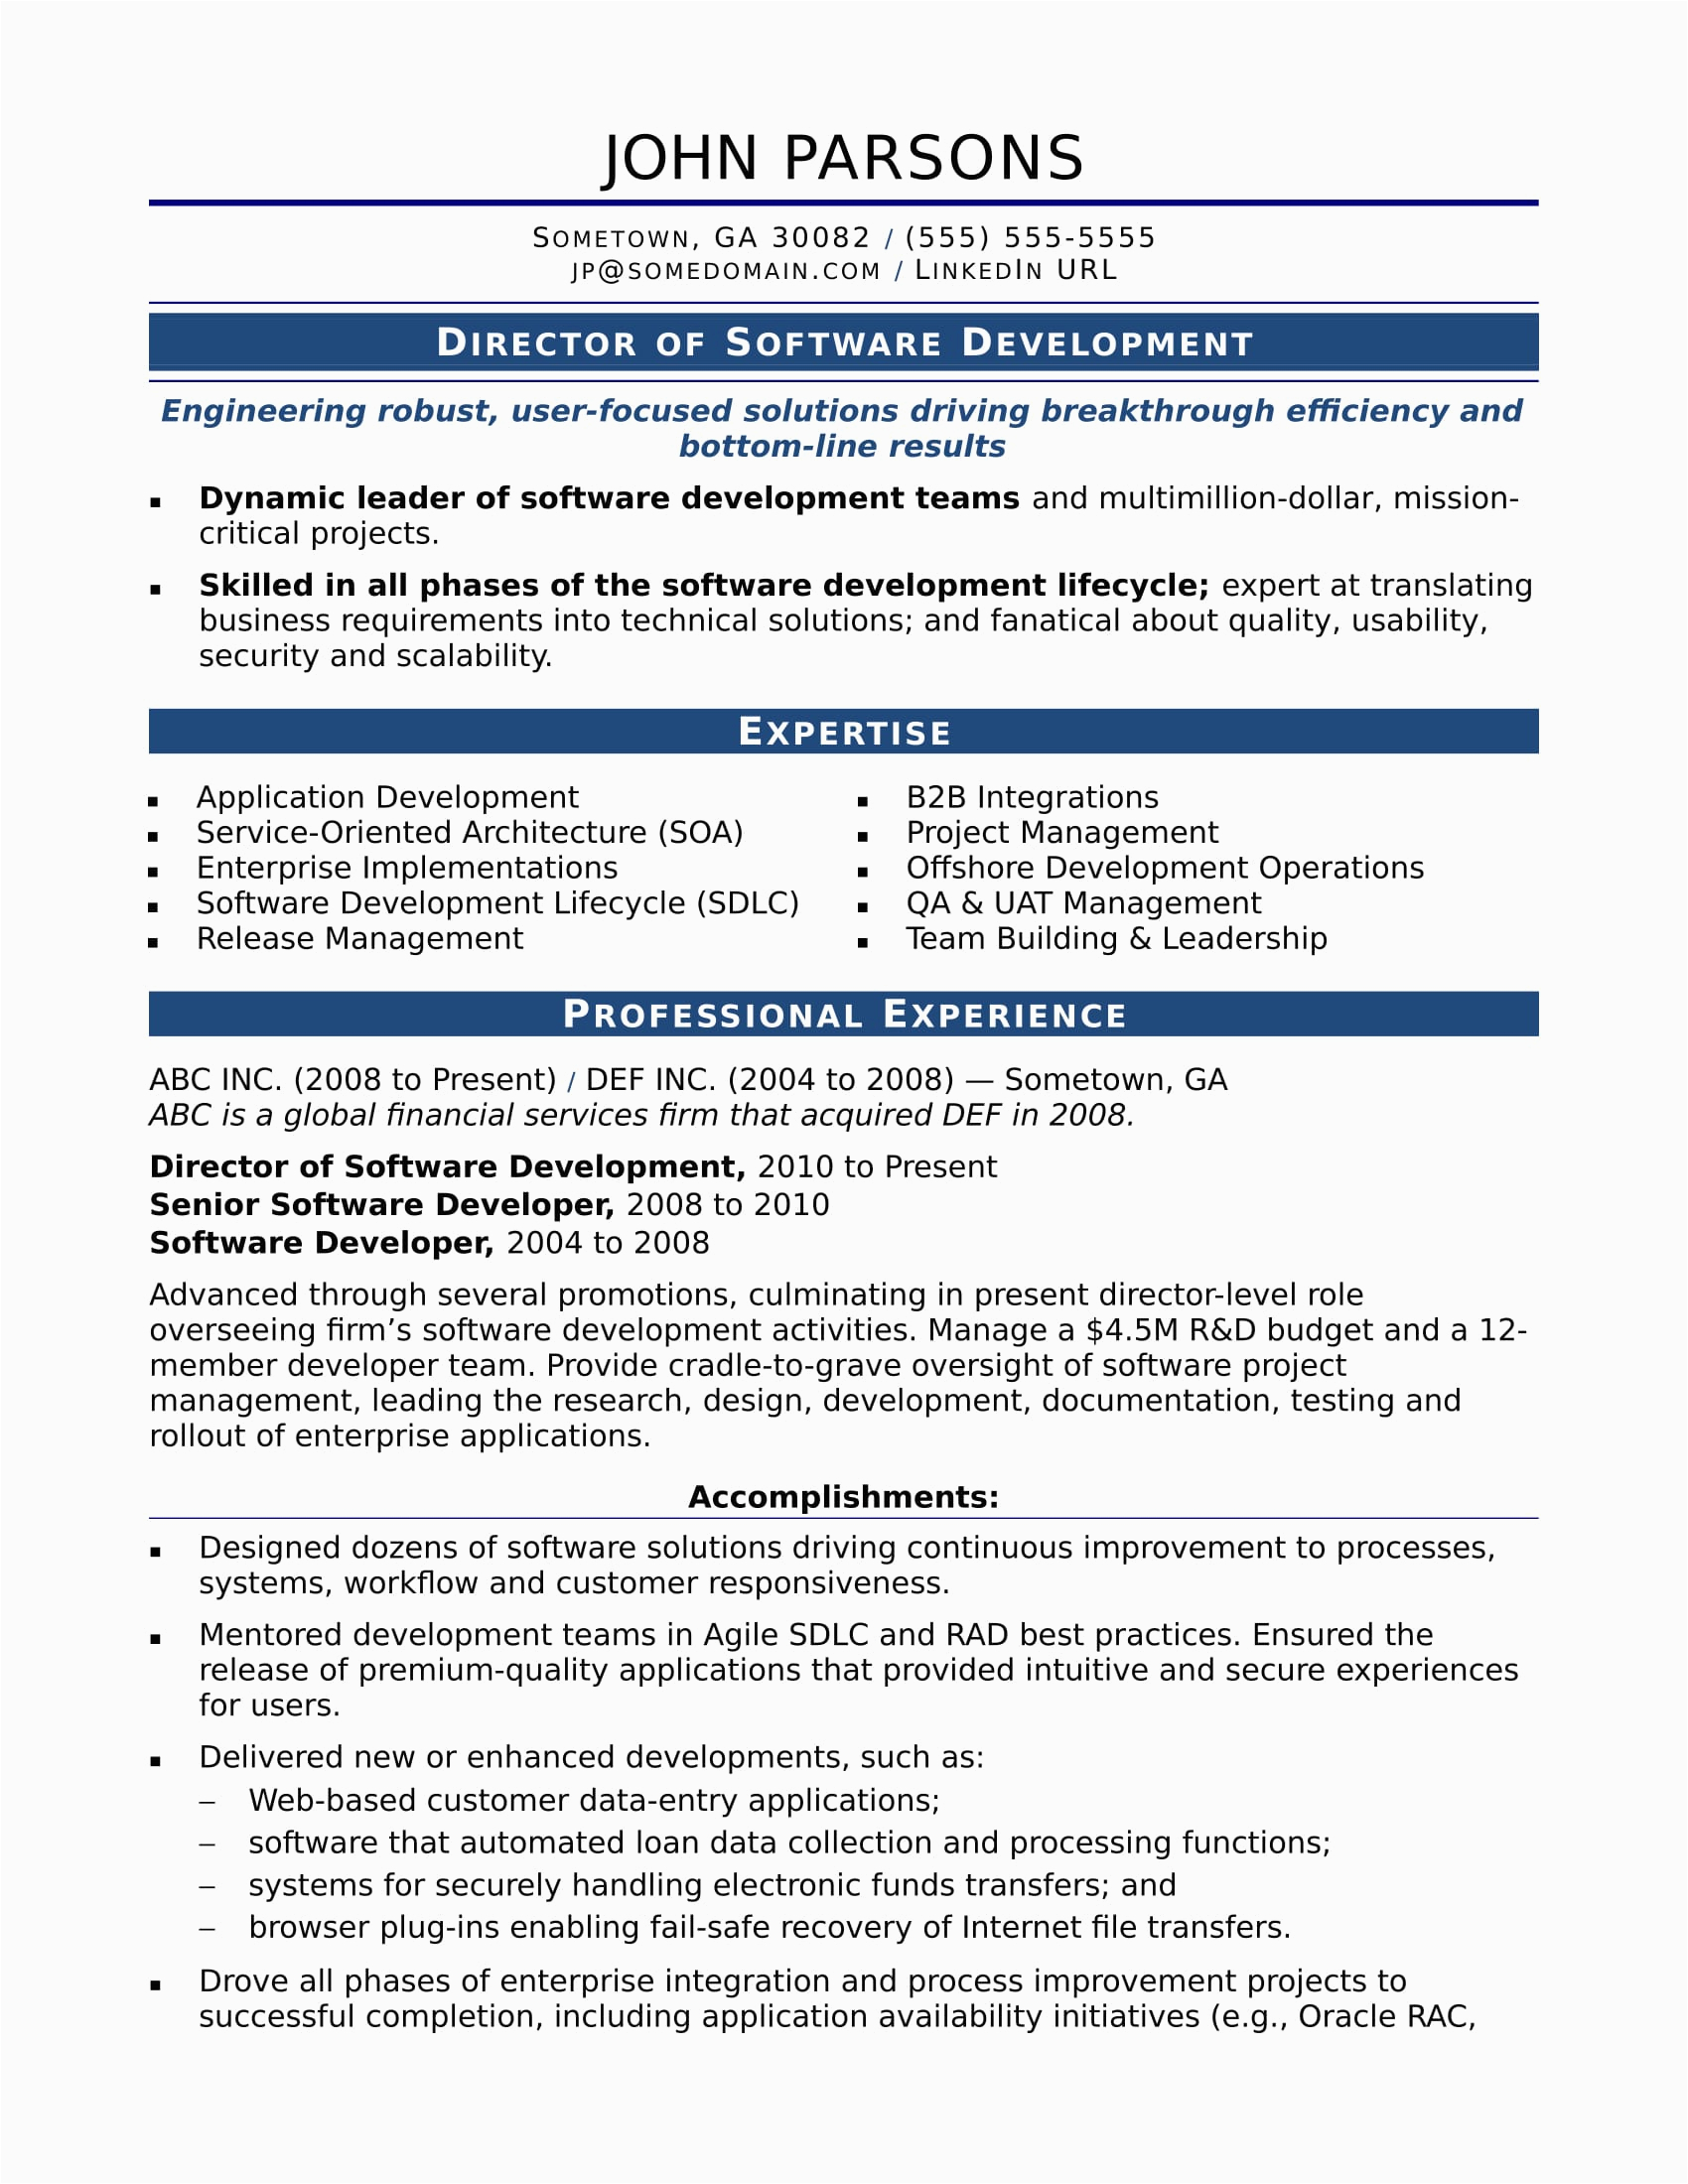 Sample Resume for software Engineer with 4 Years Experience Sample Resume for 4 Years Experience In software Testing